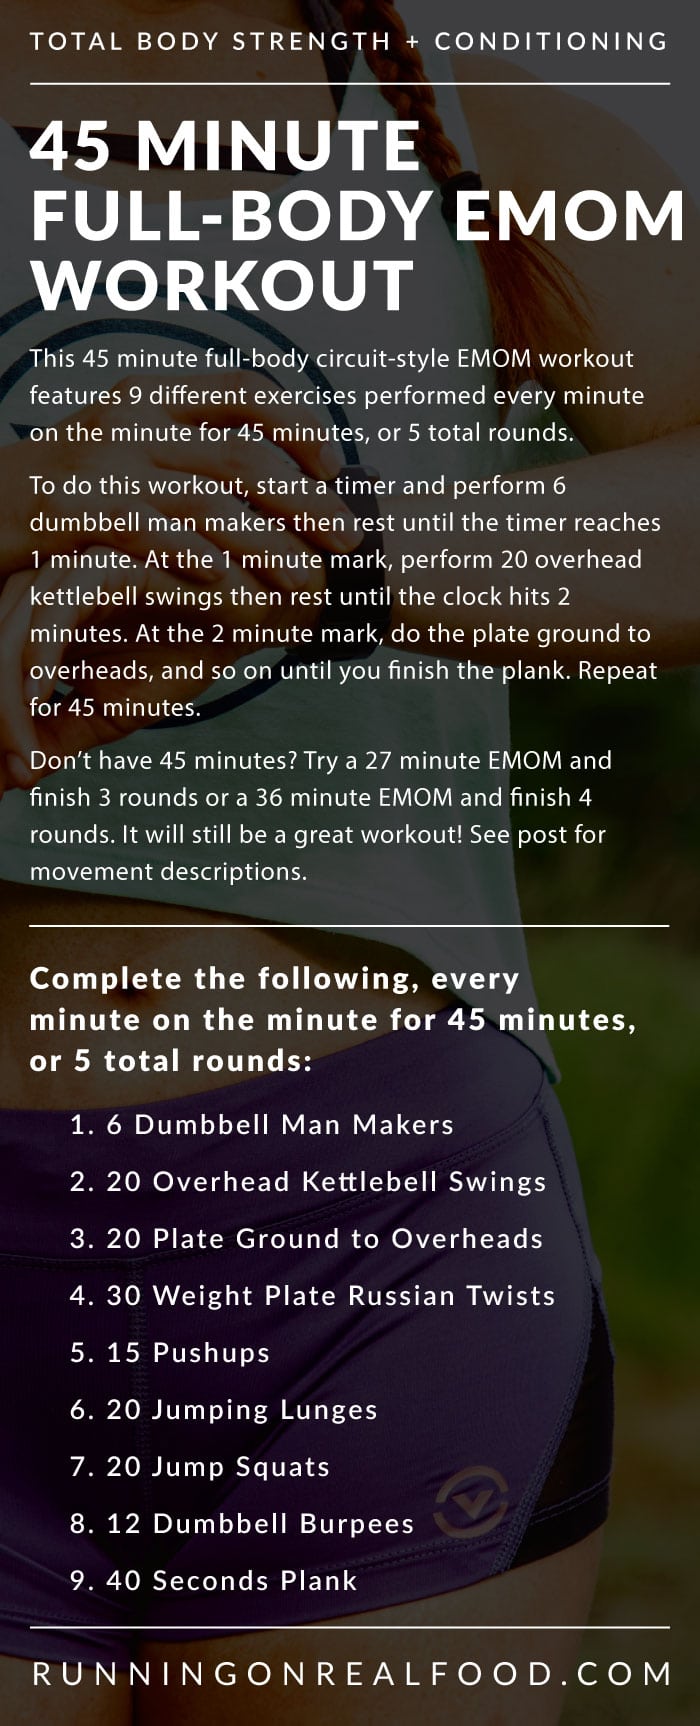 45 Minute EMOM Conditioning Workout for the Gym from Running on Real Food